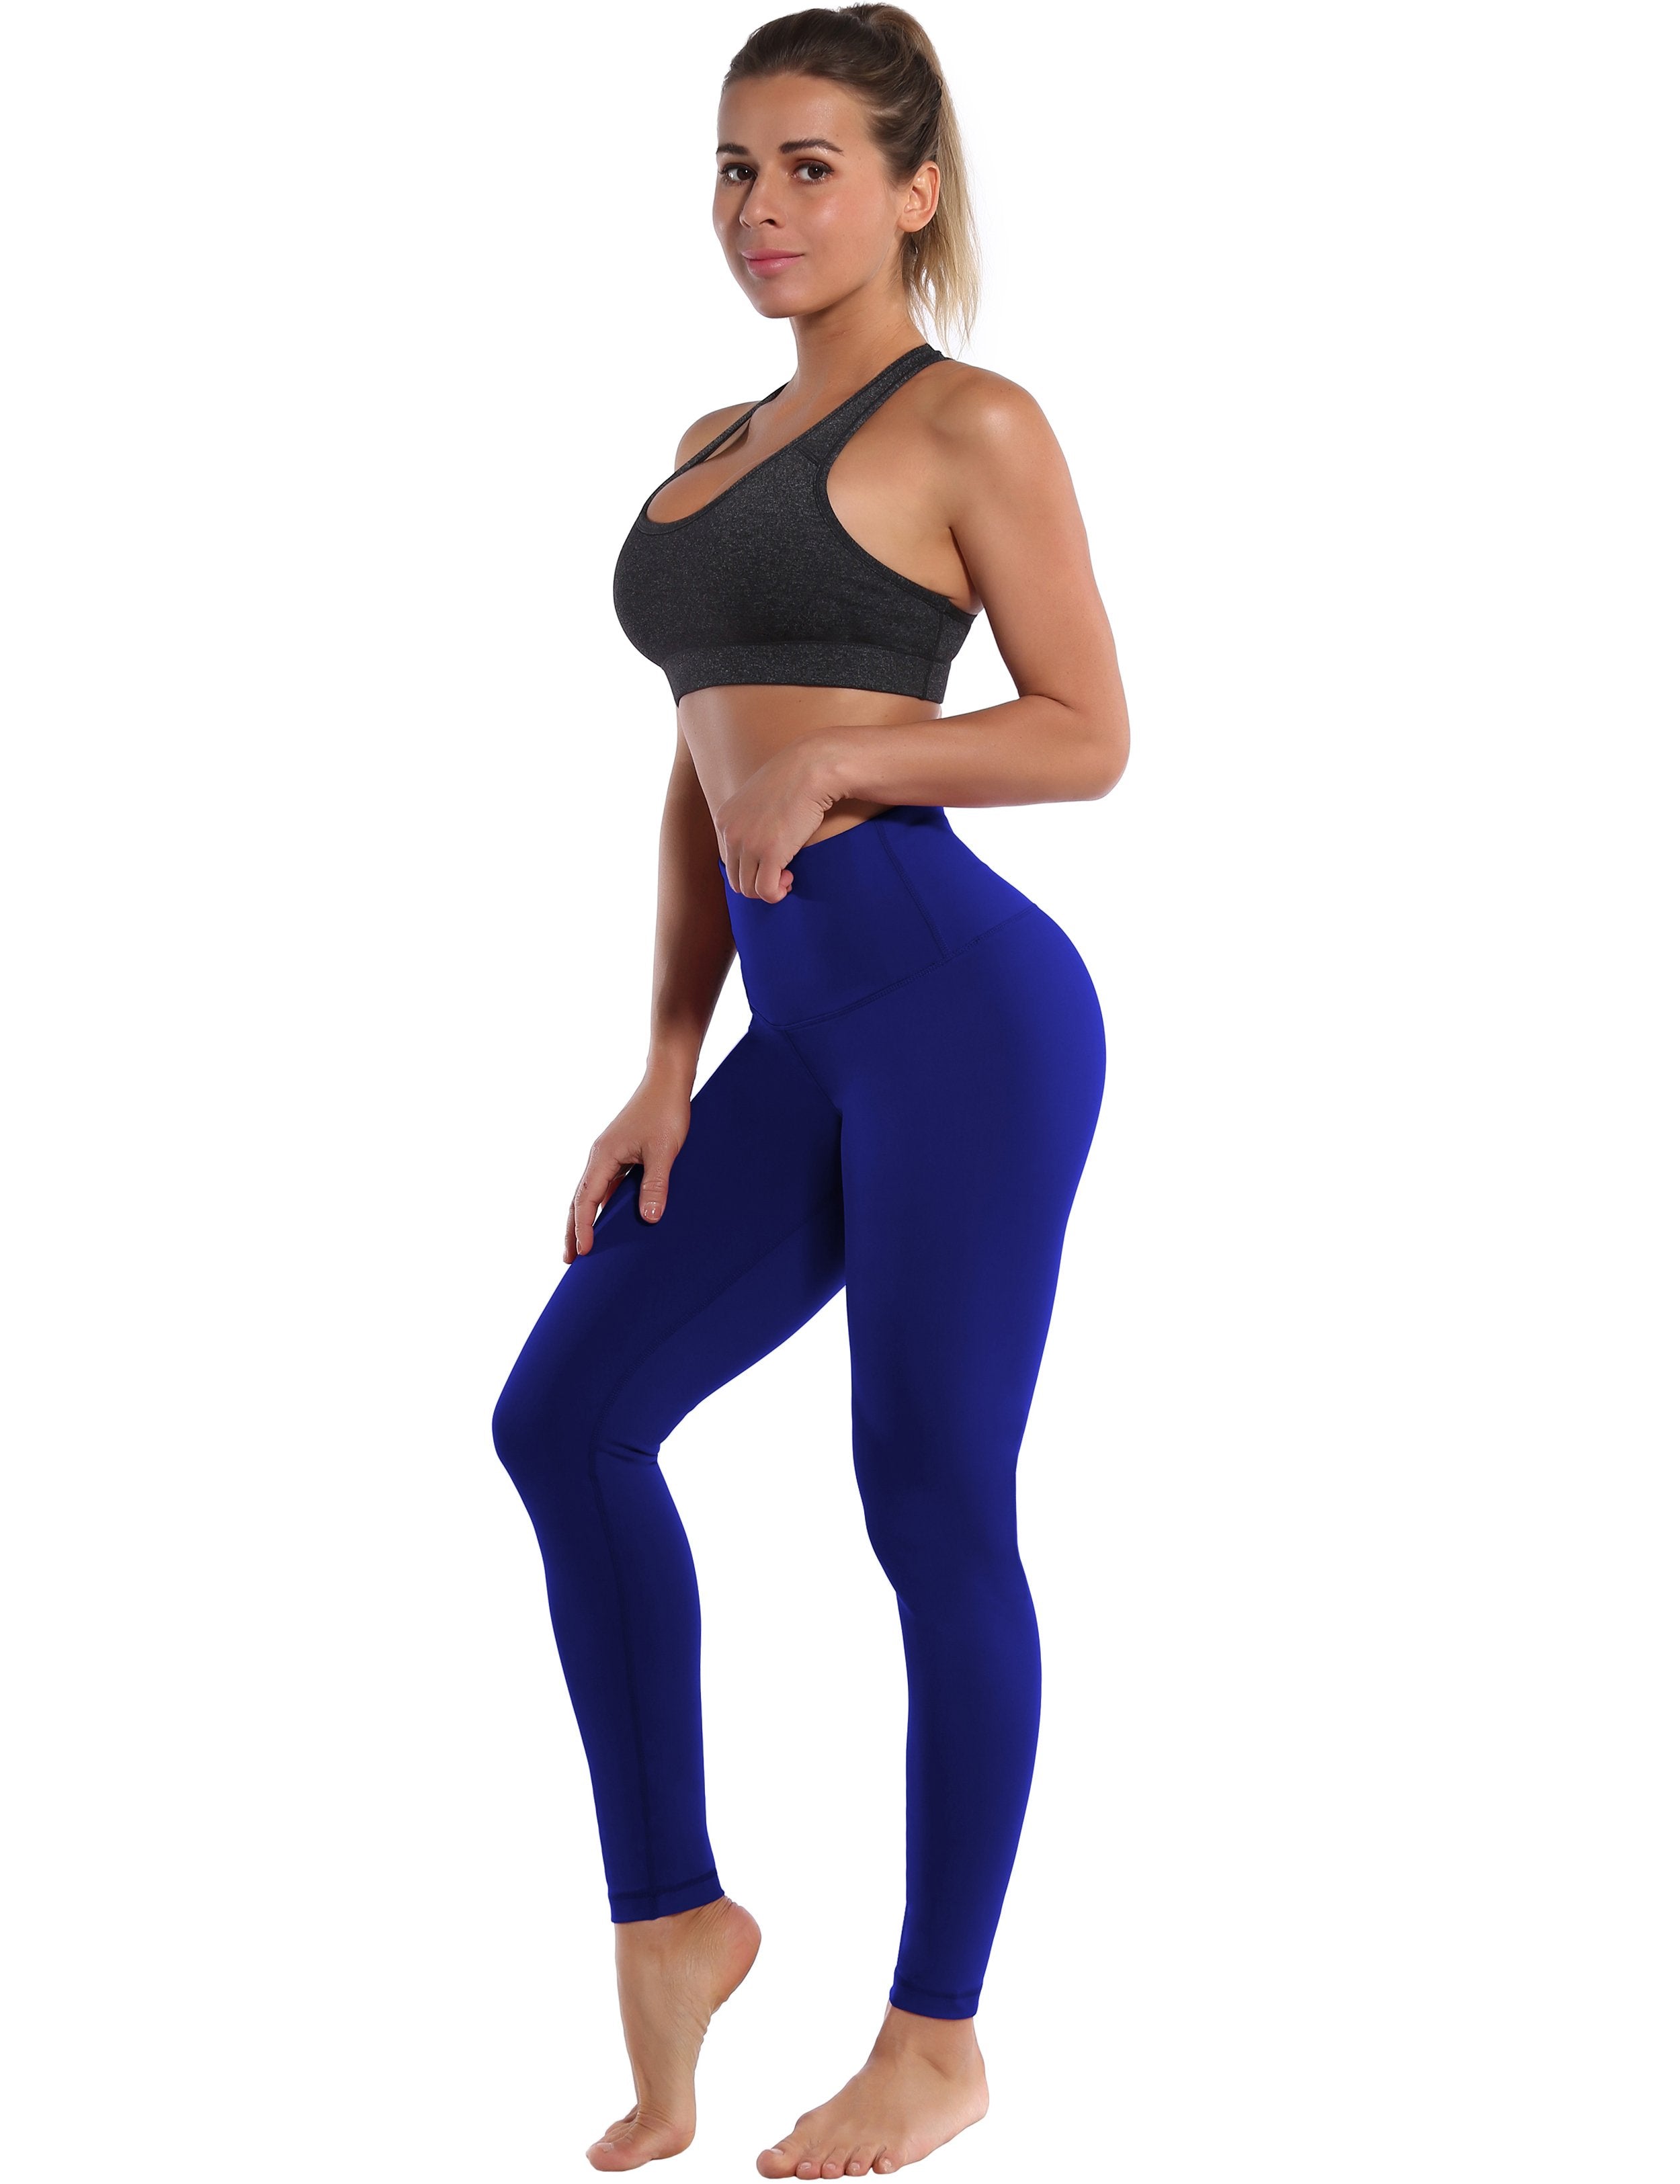 High Waist yogastudio Pants navy 75%Nylon/25%Spandex Fabric doesn't attract lint easily 4-way stretch No see-through Moisture-wicking Tummy control Inner pocket Four lengths